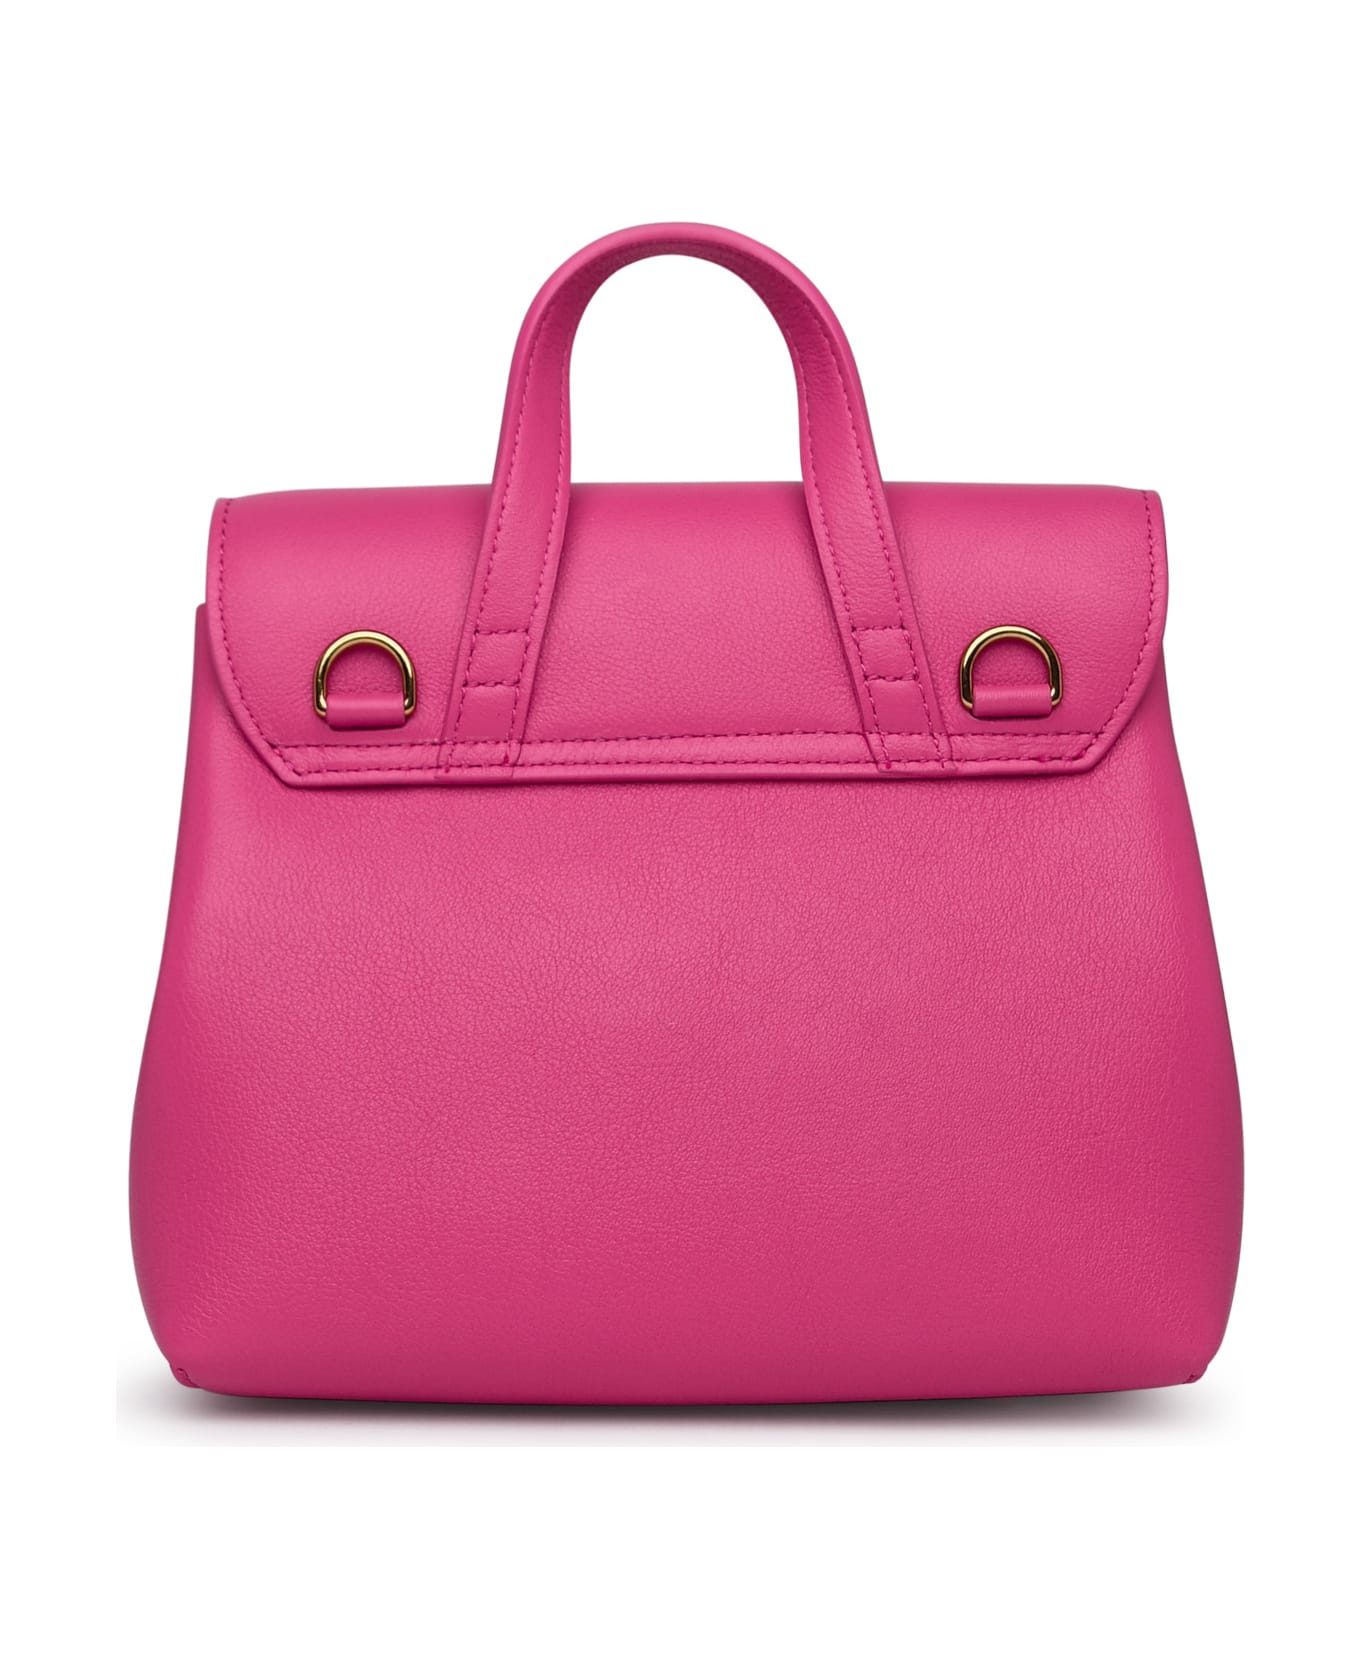 Mansur Gavriel Small 'lady Soft' Bag In Pink Leather - Pink